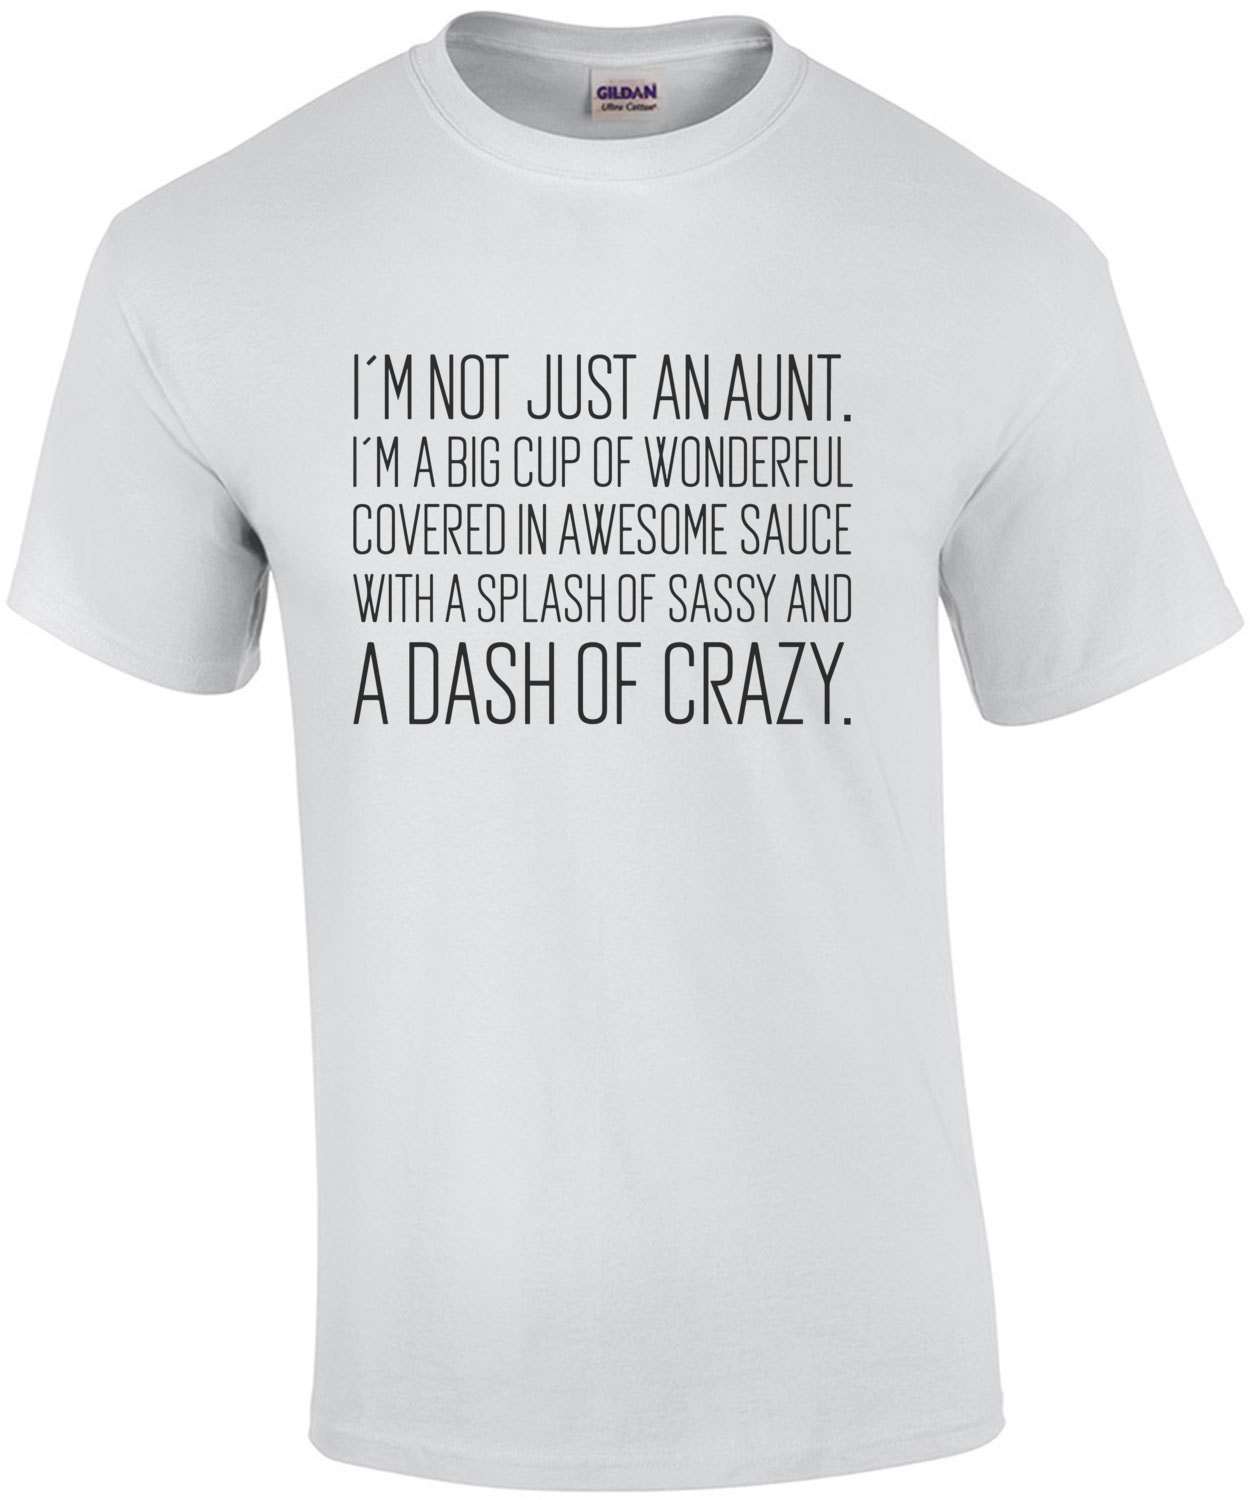 I'm not just an aunt. I'm a big cup of wonderful covered in awesome sauce with a splash of sassy and a dash of crazy. Funny Aunt T-Shirt